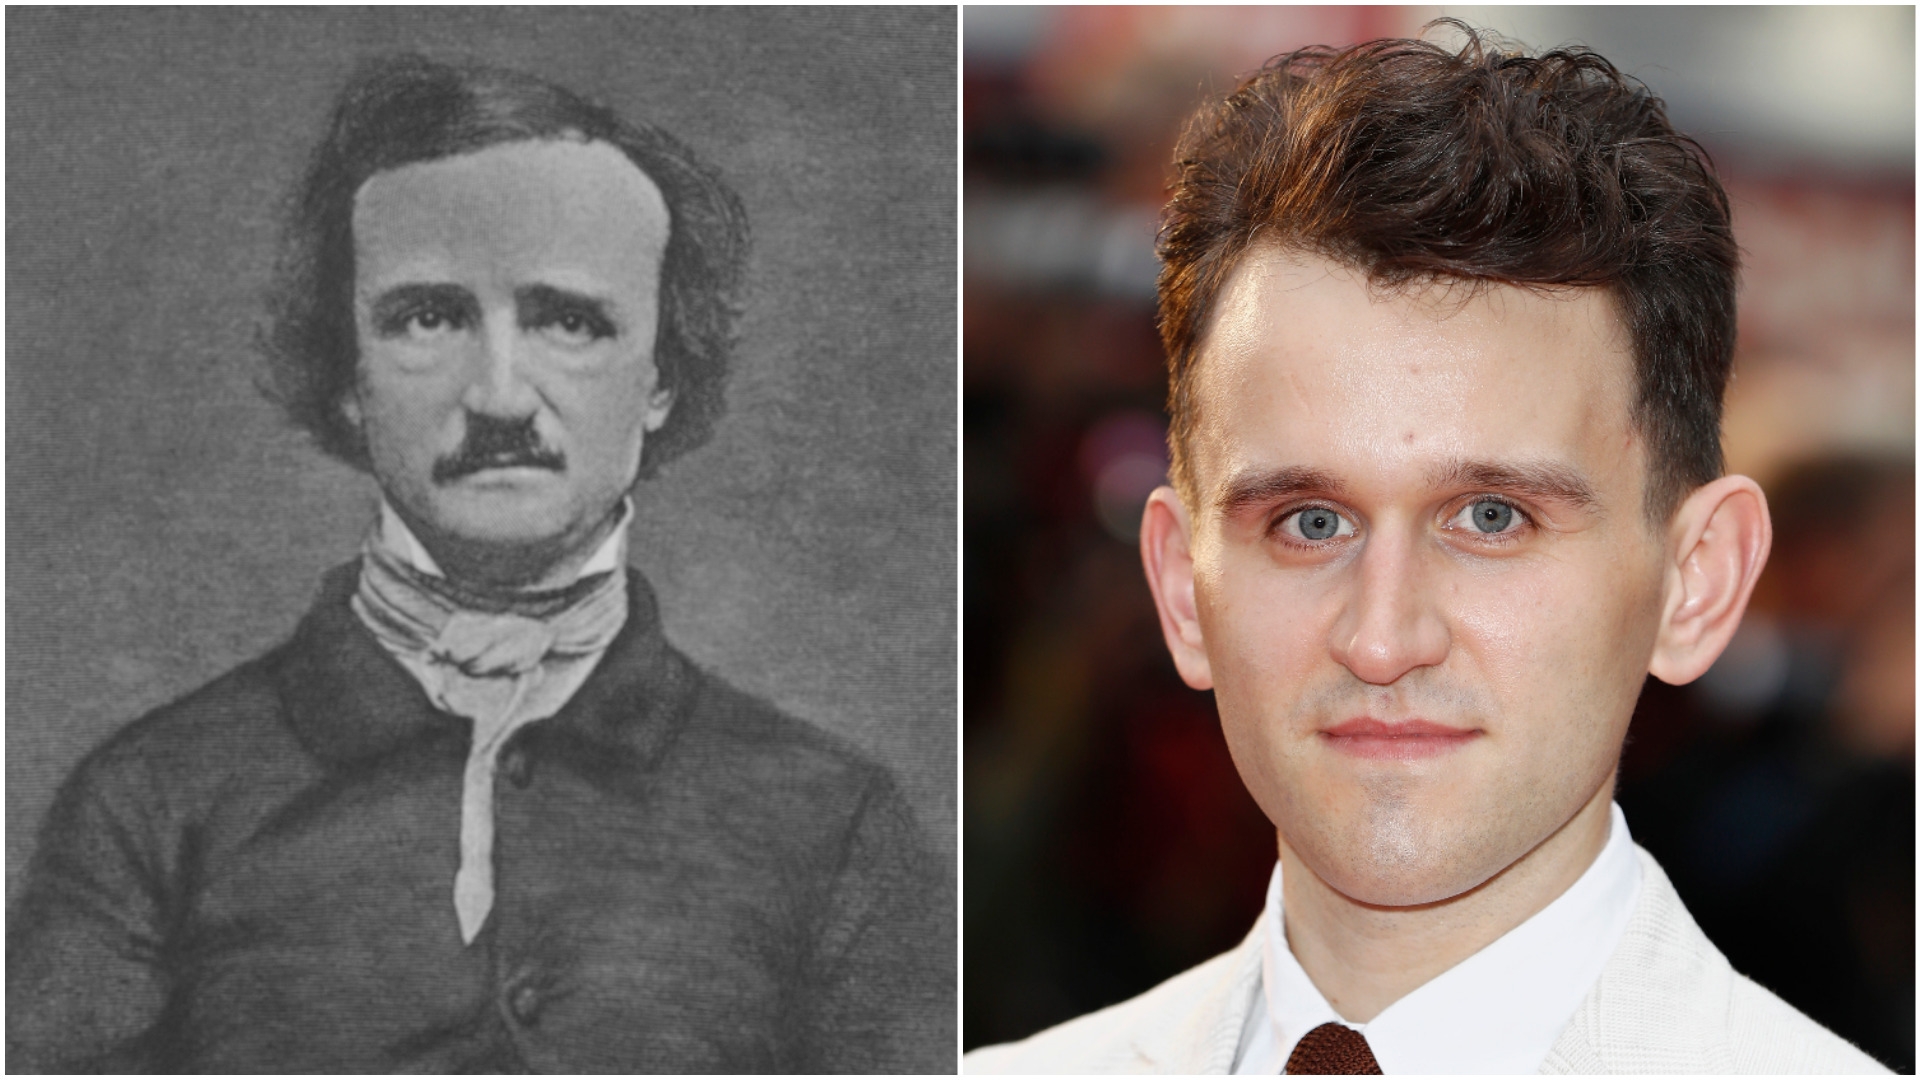 Forget John Cusack, Harry Potter’s Harry Melling is your new Edgar Allan Poe